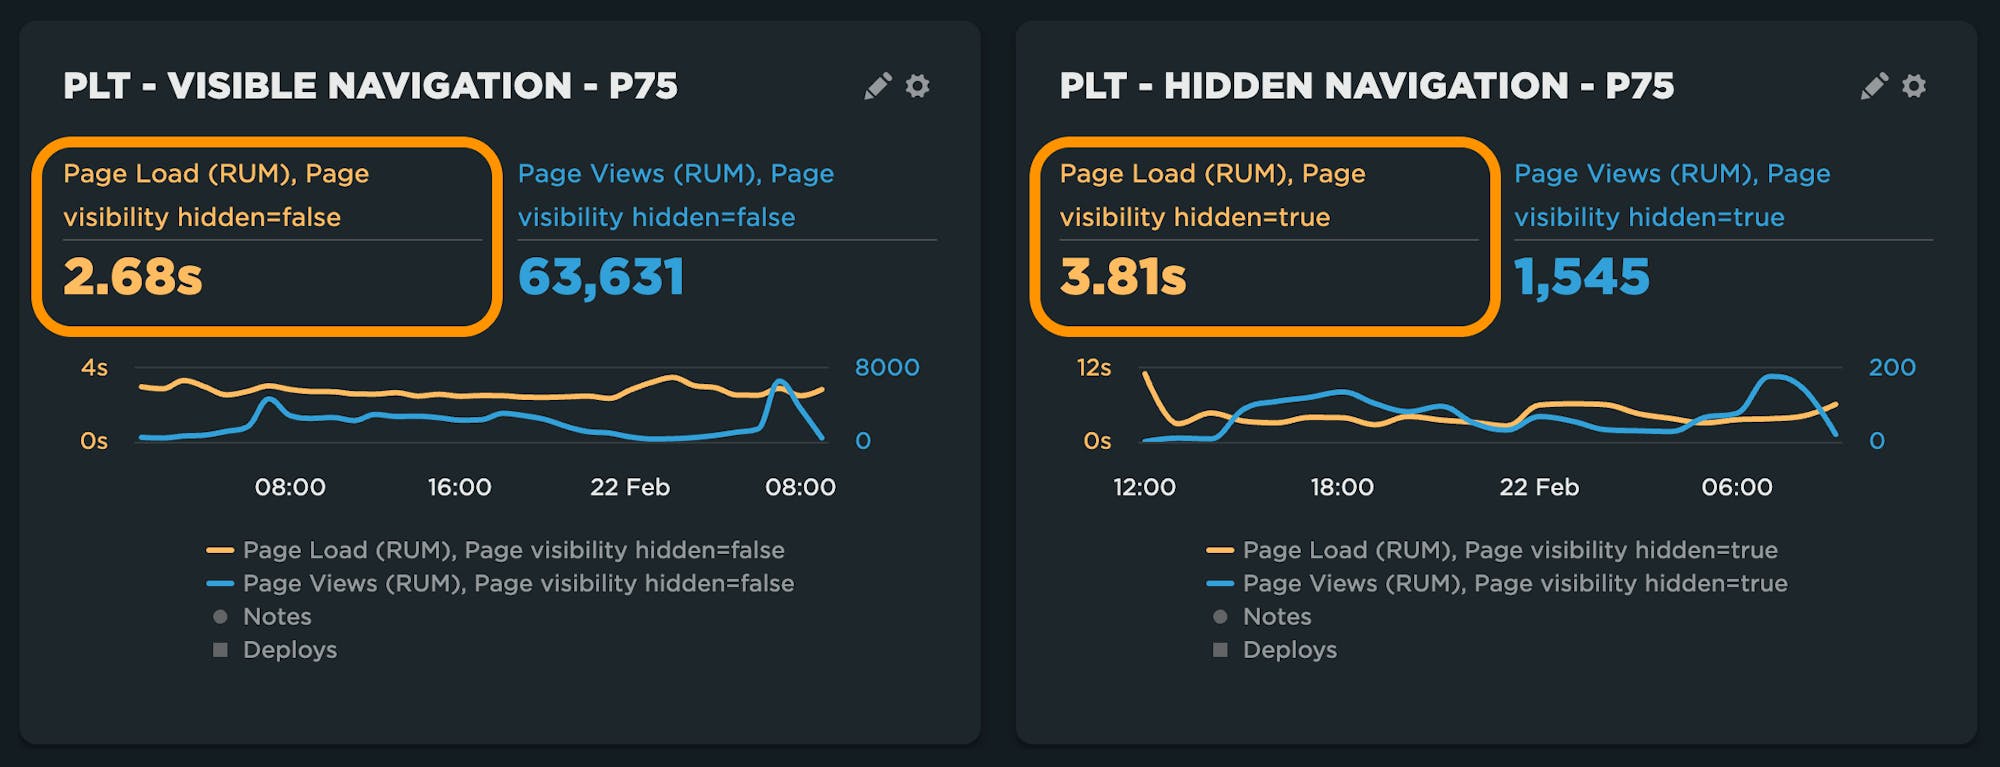 Time series data showing page load time slower for hidden pages than visible navigations.